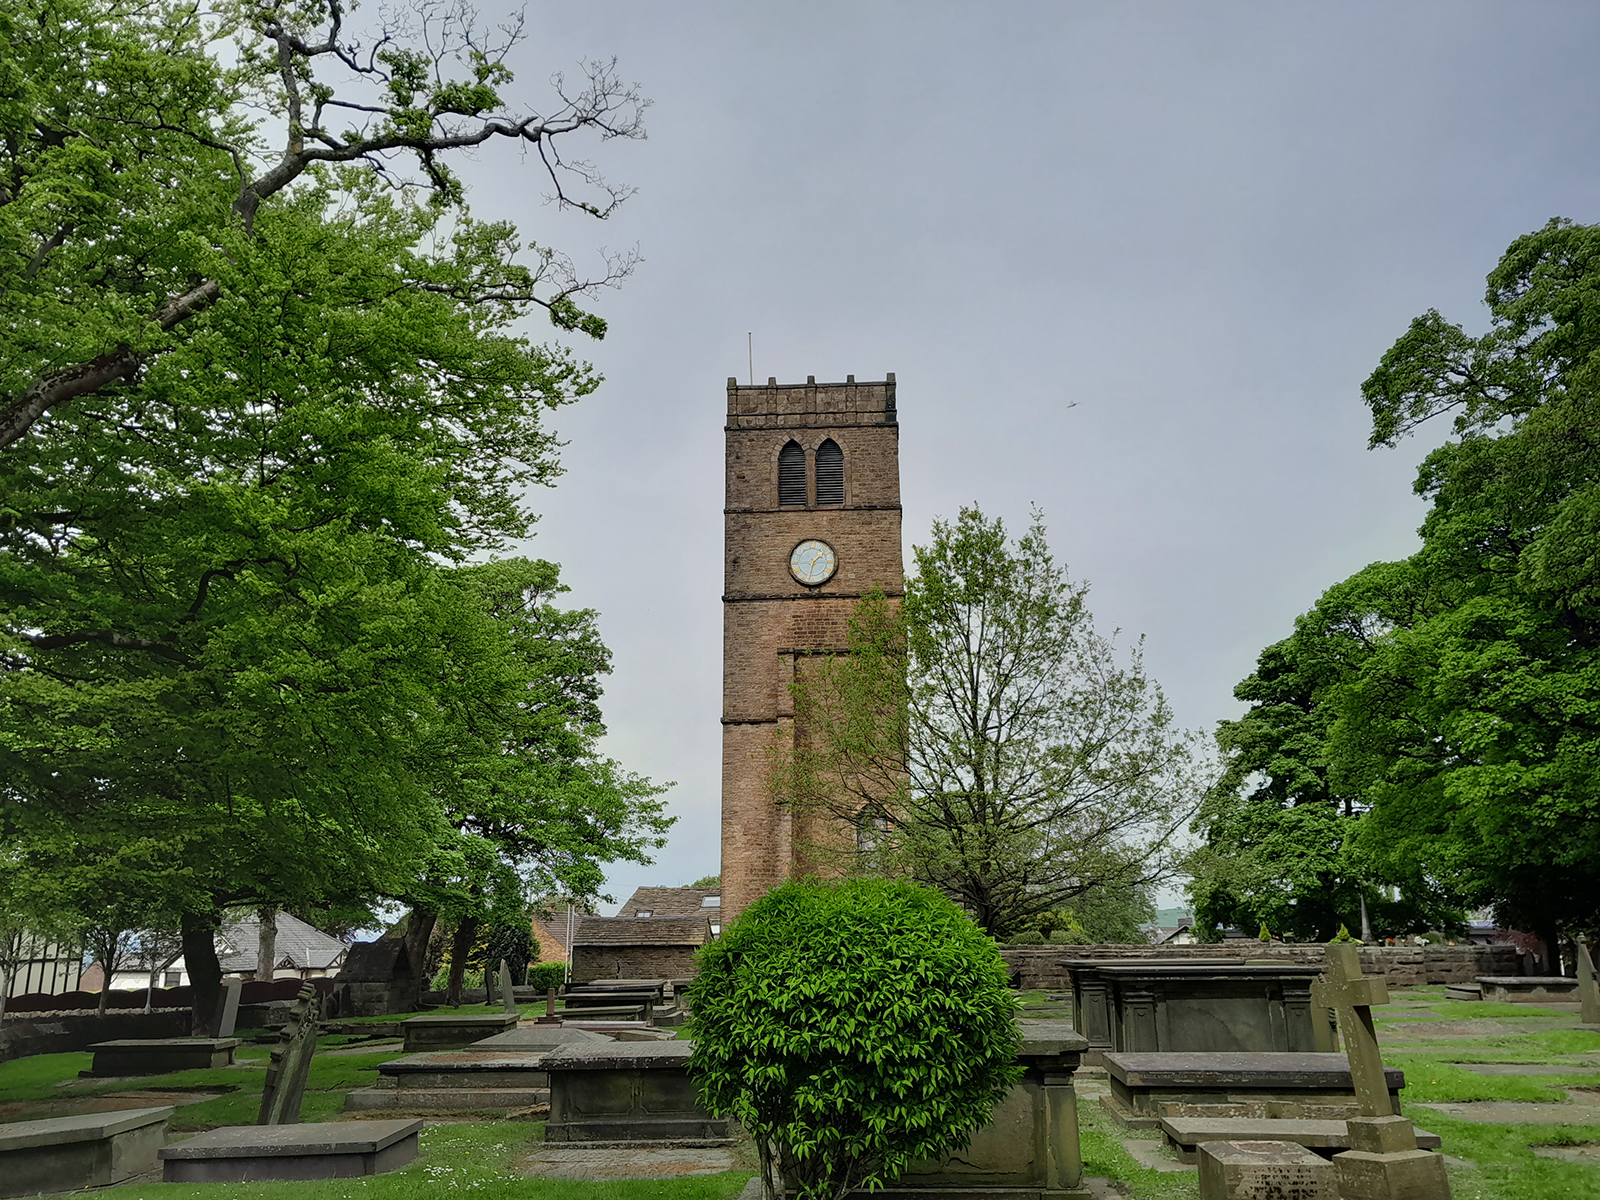 Samsung Galaxy A13 camera sample showing a church tower in the day